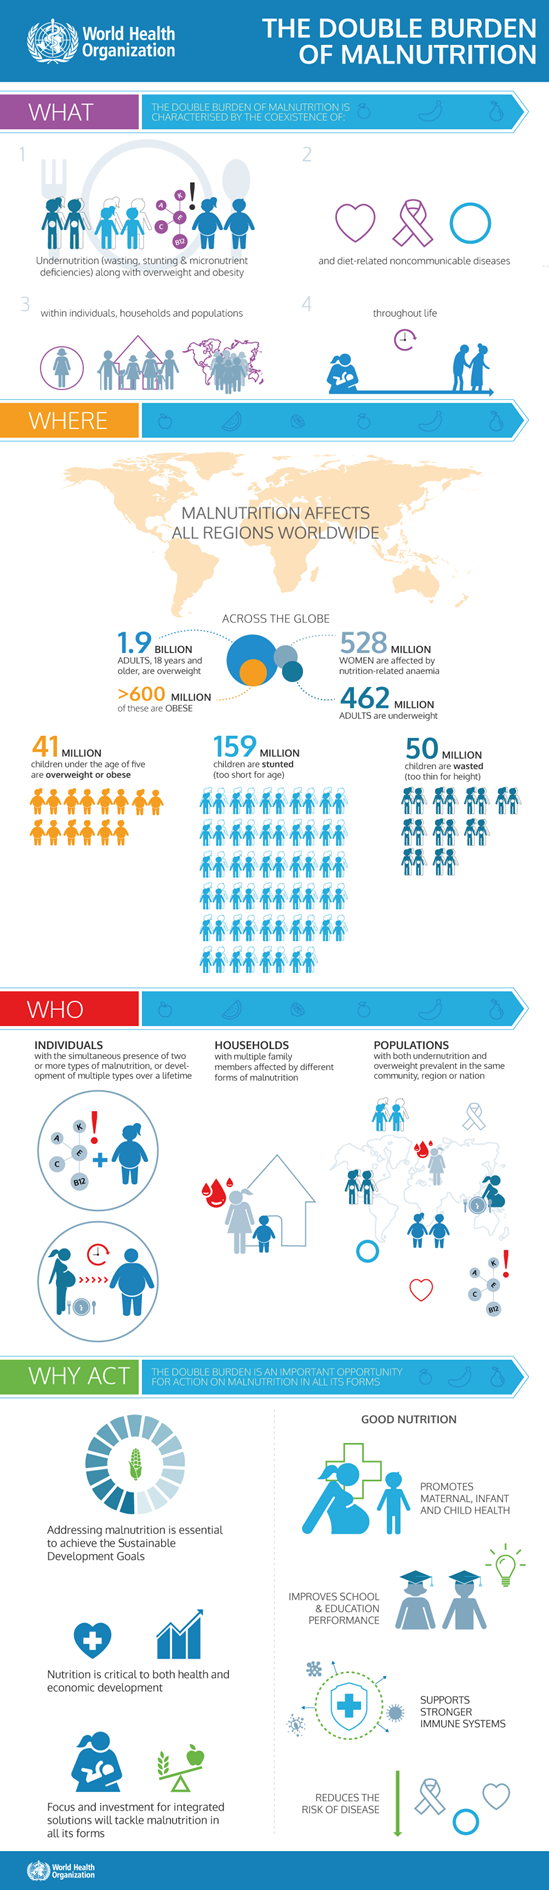 The double burden of malnutrition infographic